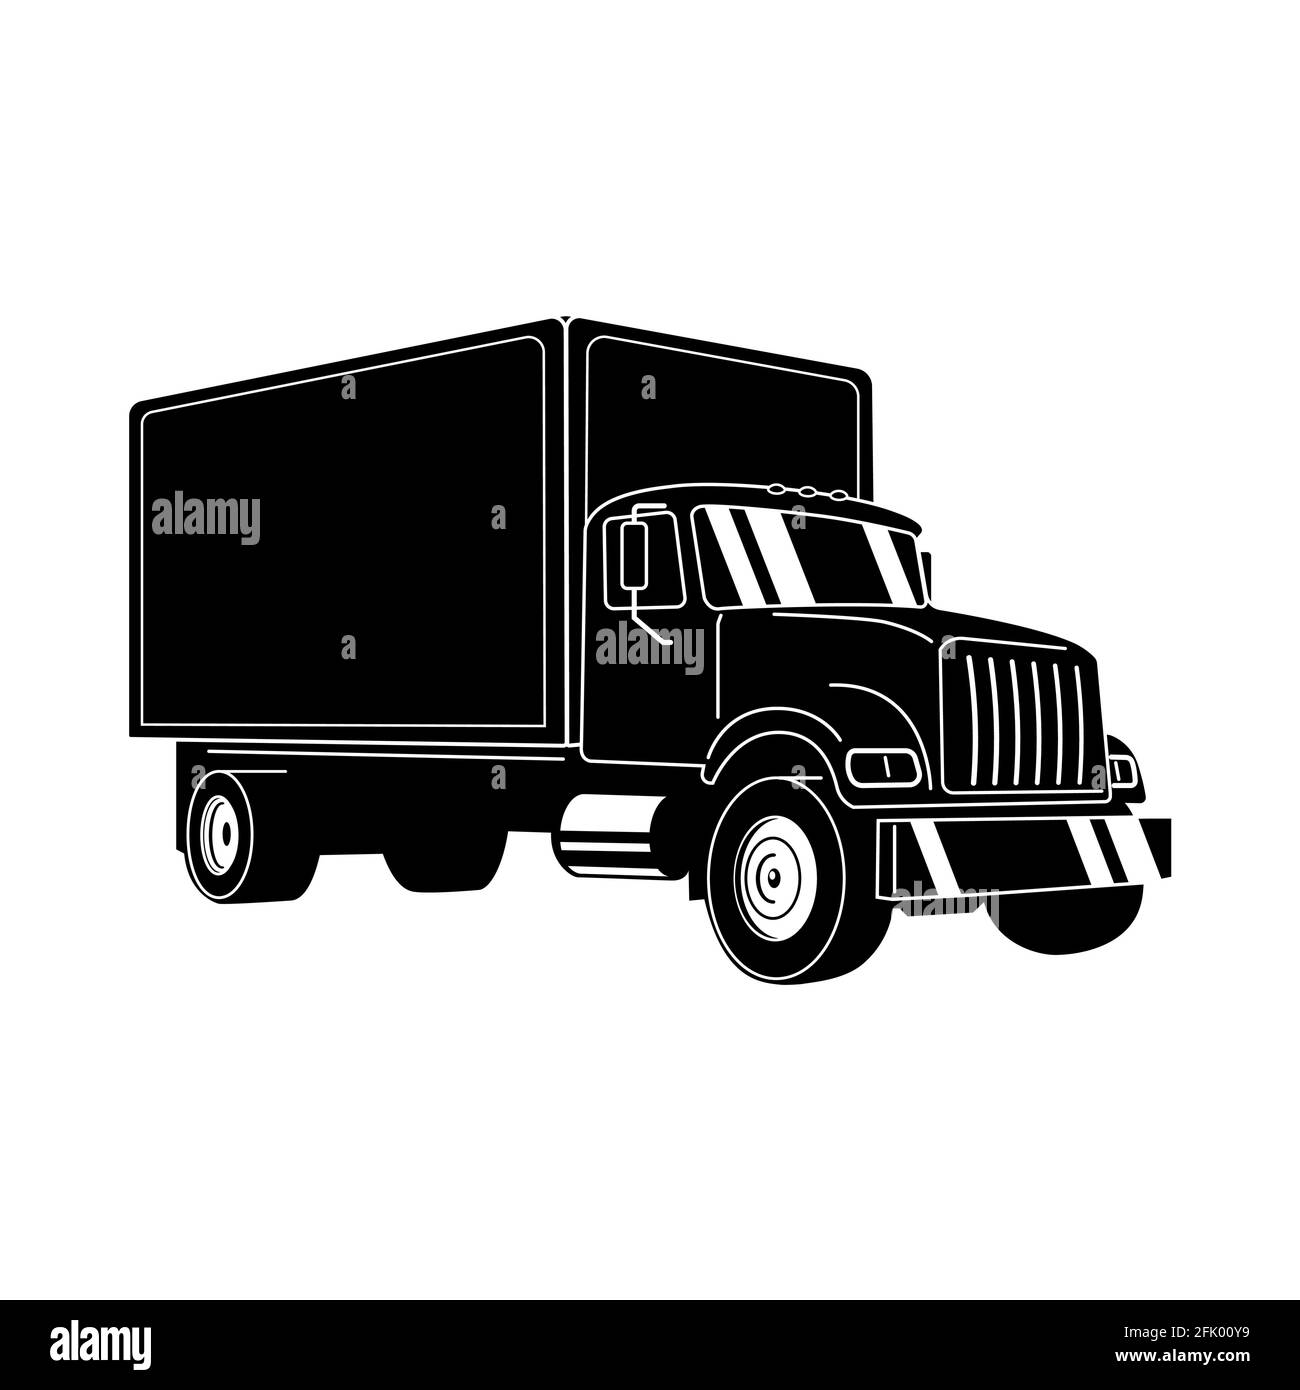 Moving Truck. Delivery truck Shipping Commercial vehicle Modern flat vector illustration Stock Vector